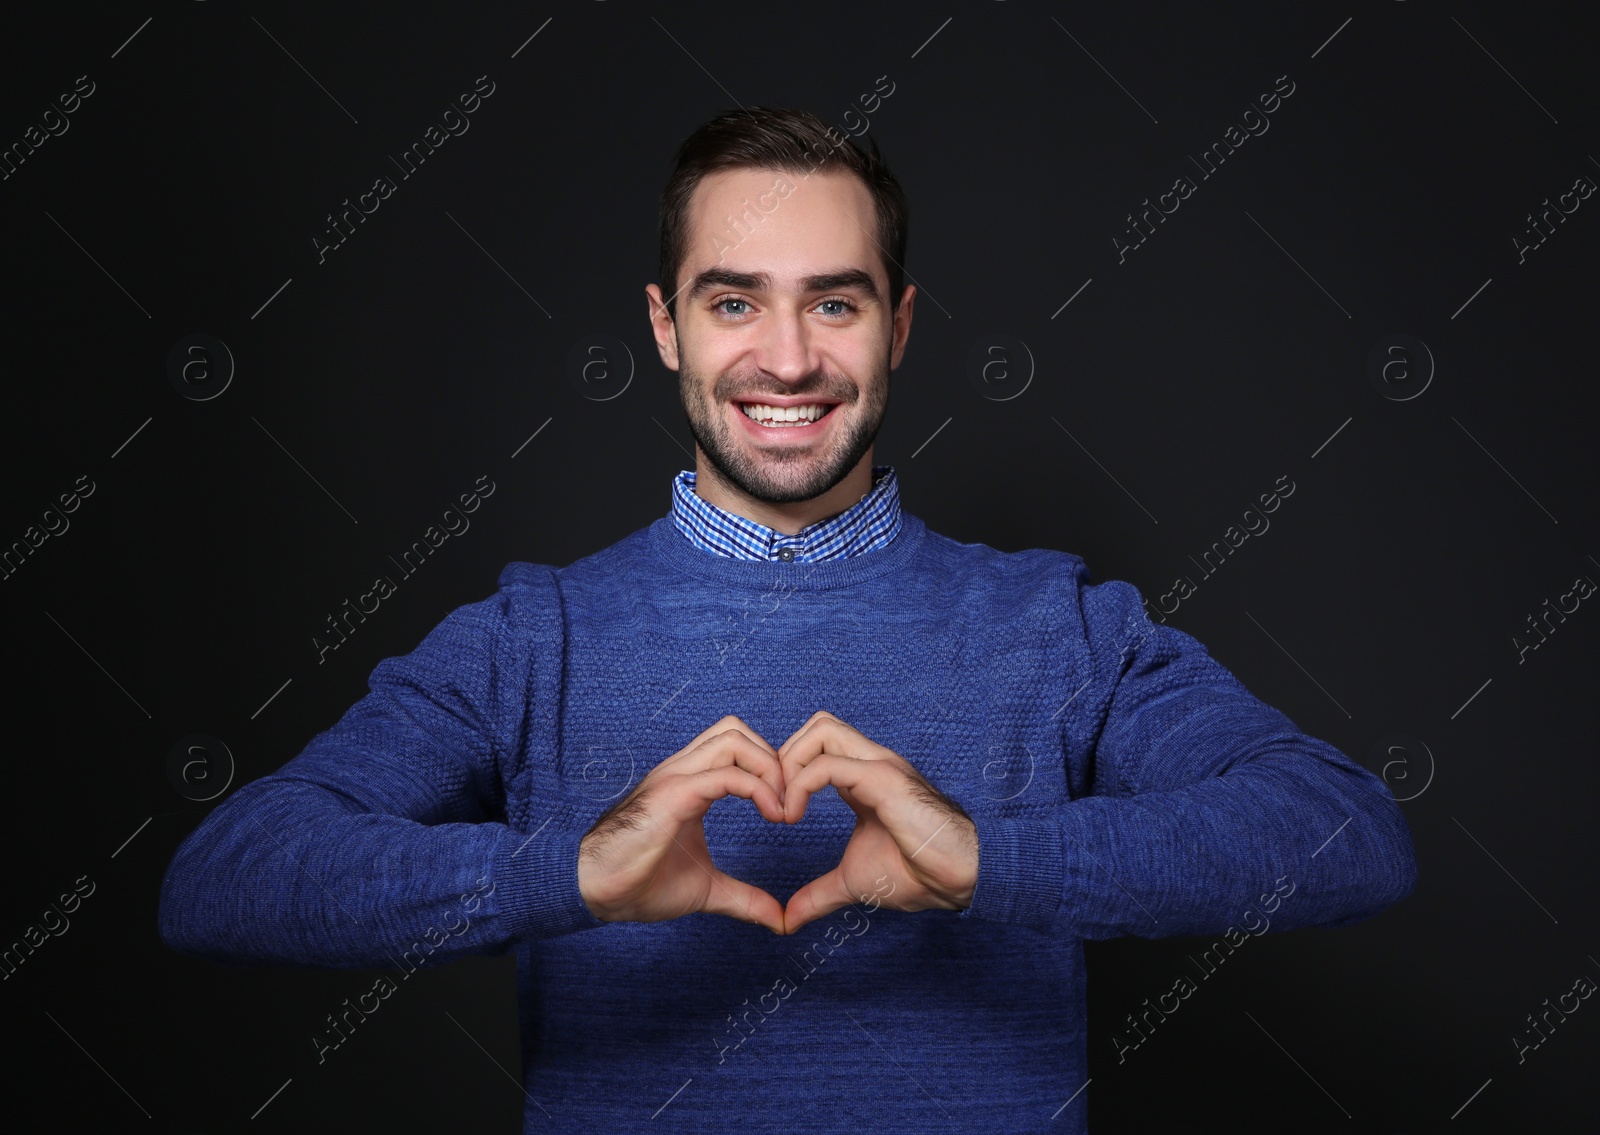 Photo of Man showing HEART gesture in sign language on black background